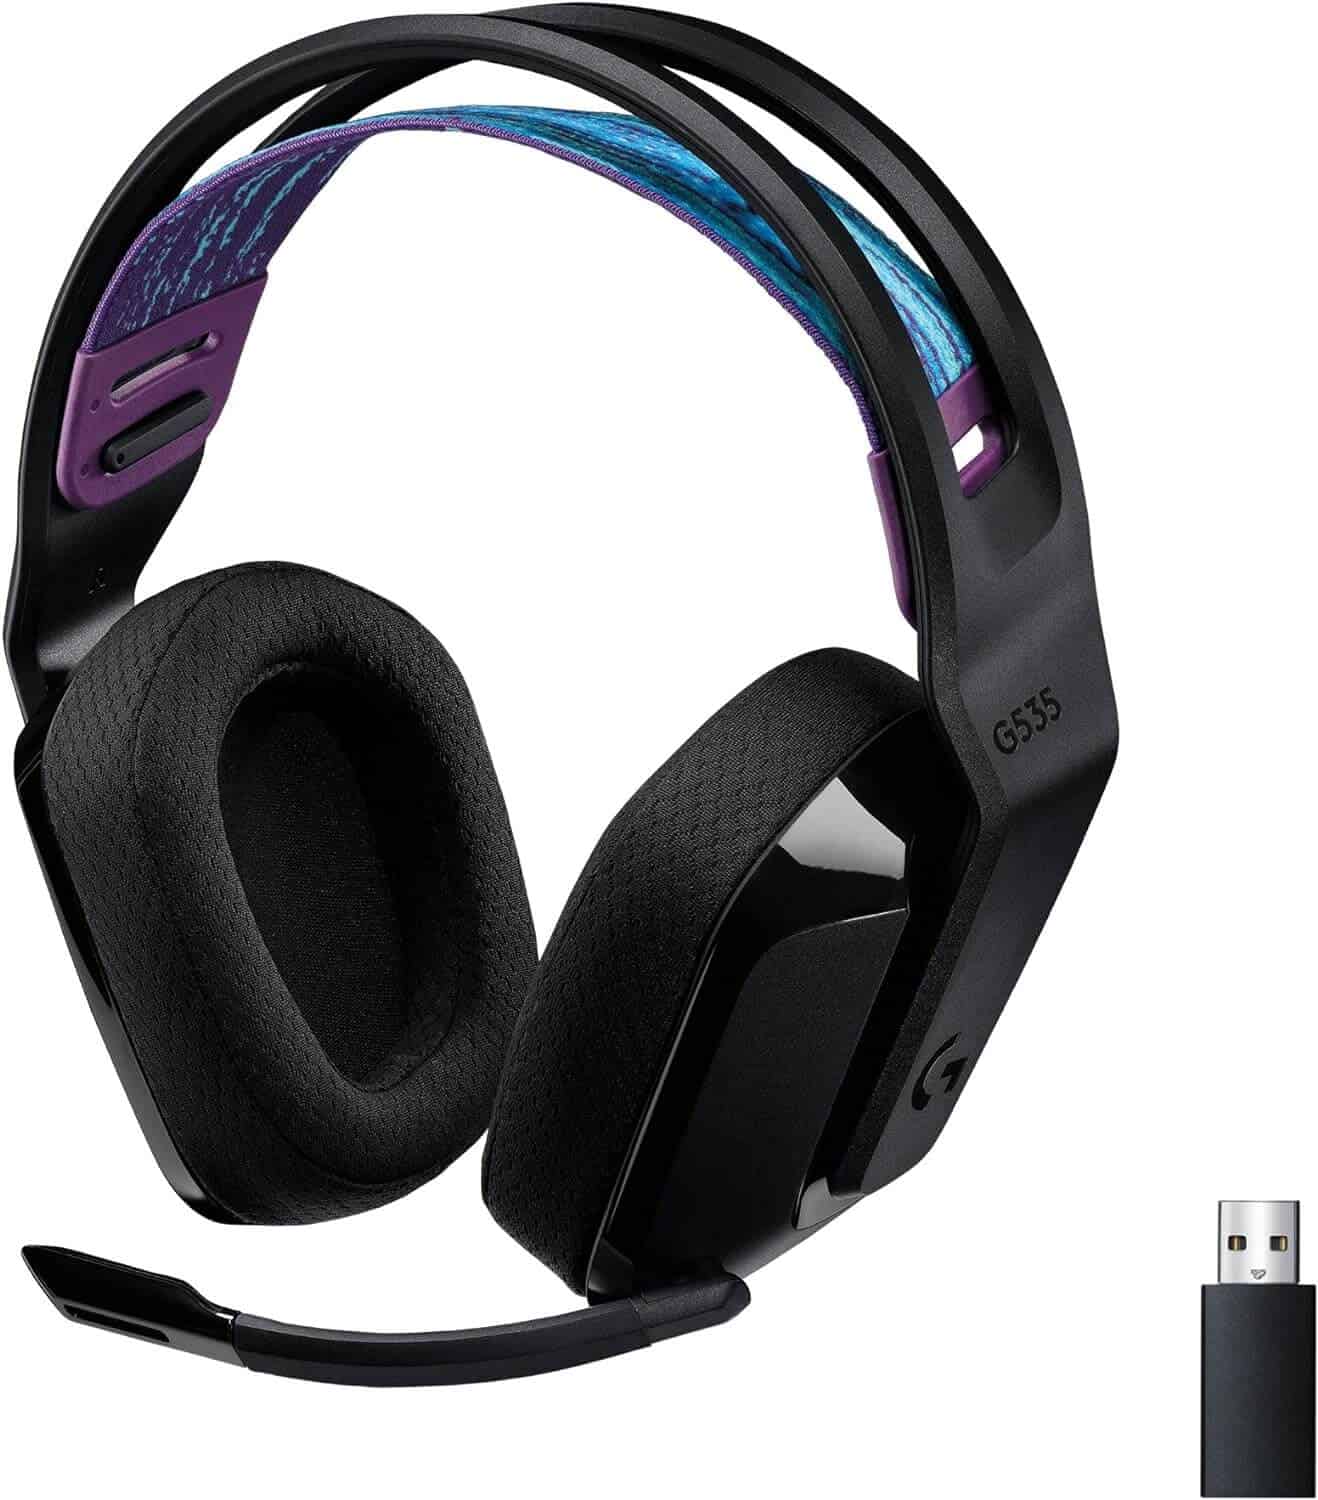 Great wireless gaming headset that's high-quality and not too expensive